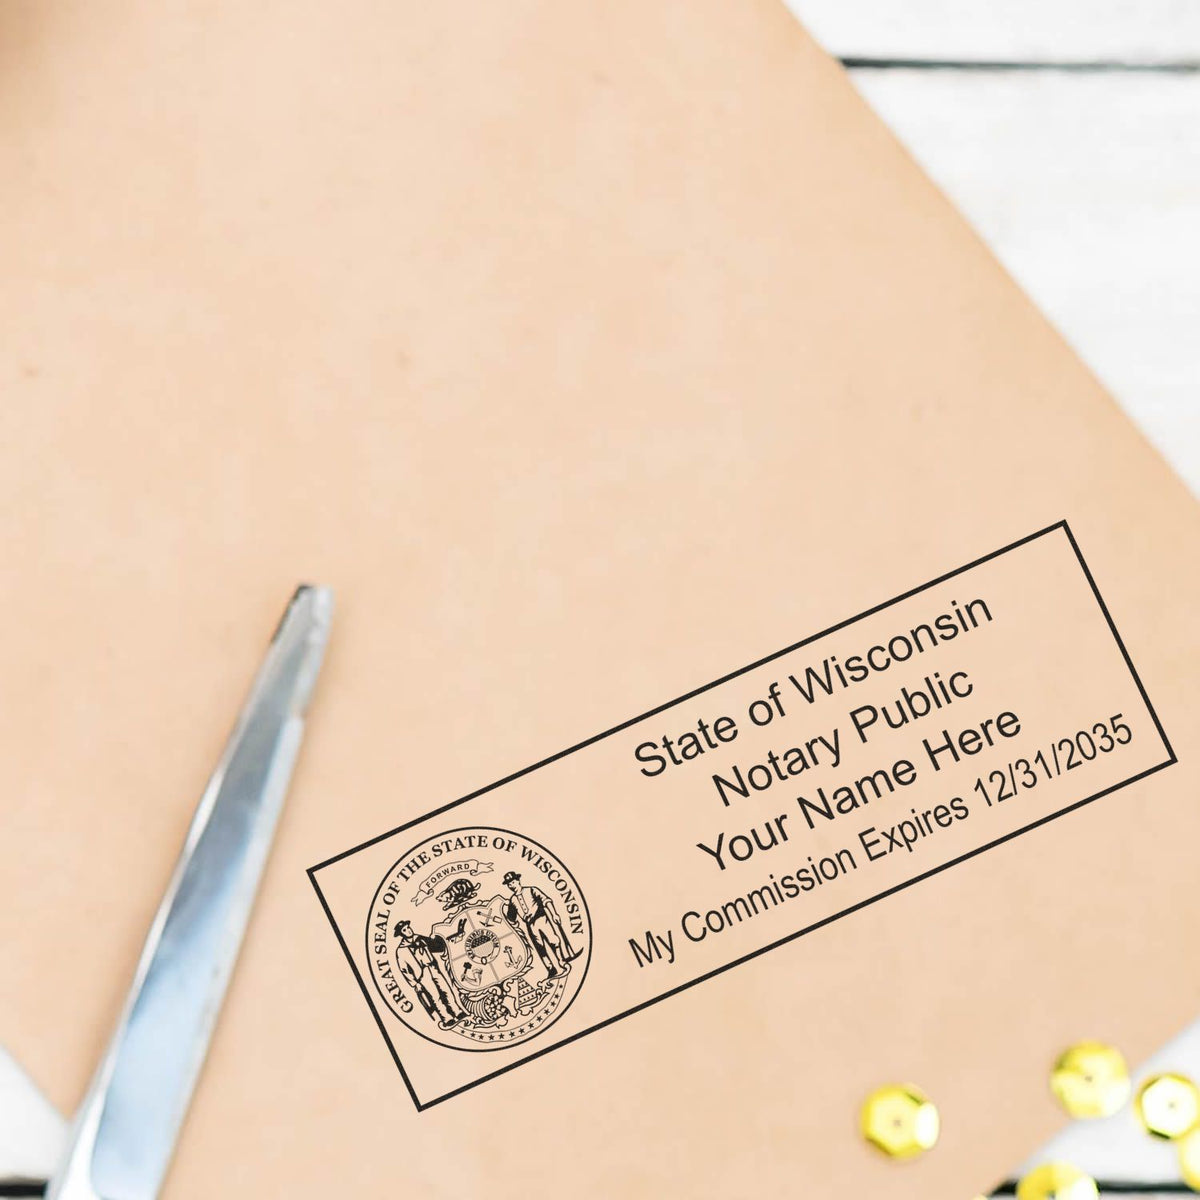 This paper is stamped with a sample imprint of the Super Slim Wisconsin Notary Public Stamp, signifying its quality and reliability.